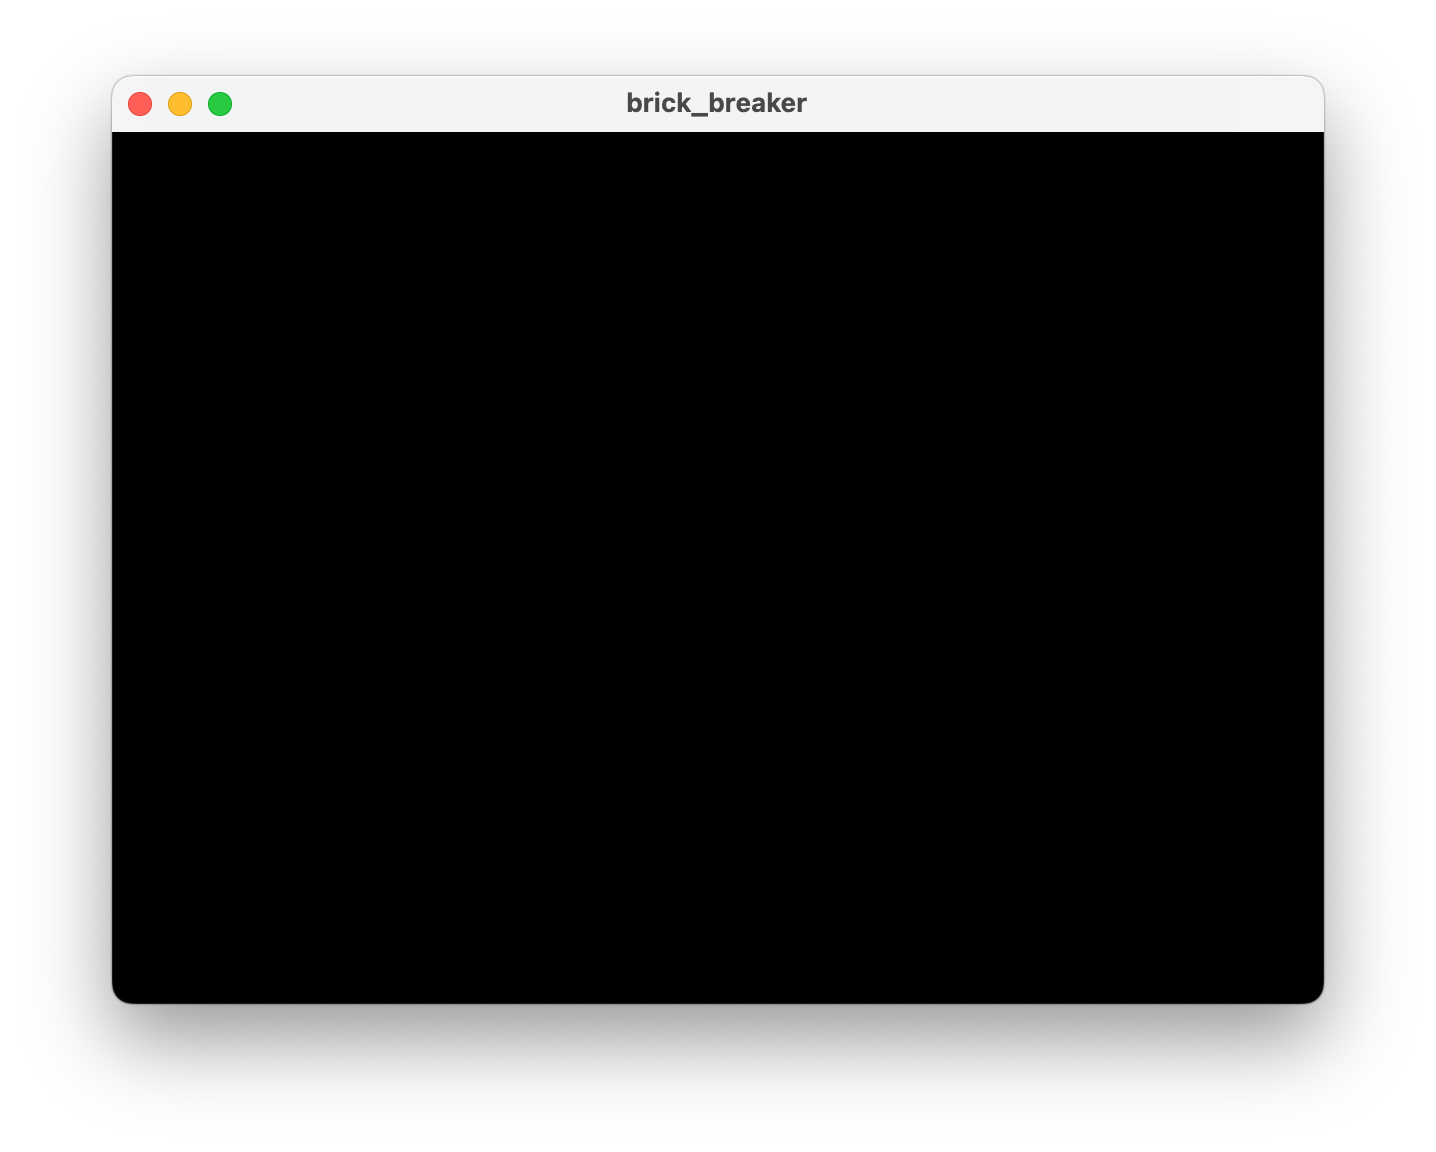 A screen shot showing a brick_breaker application window that is completely black.